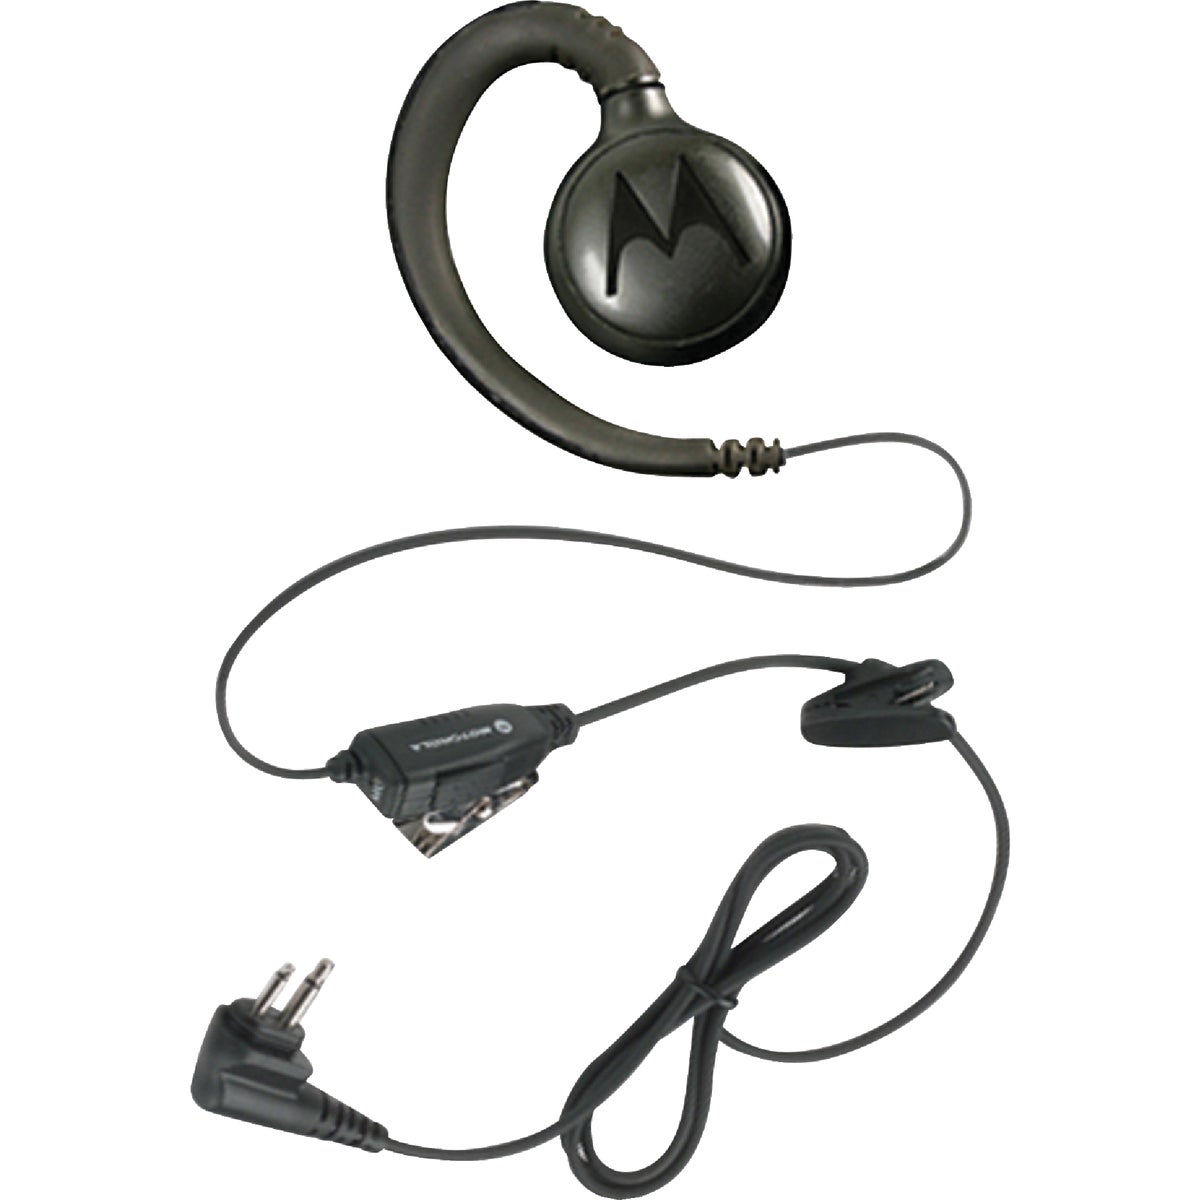 Item 510753, Lightweight earpiece fits over either ear.